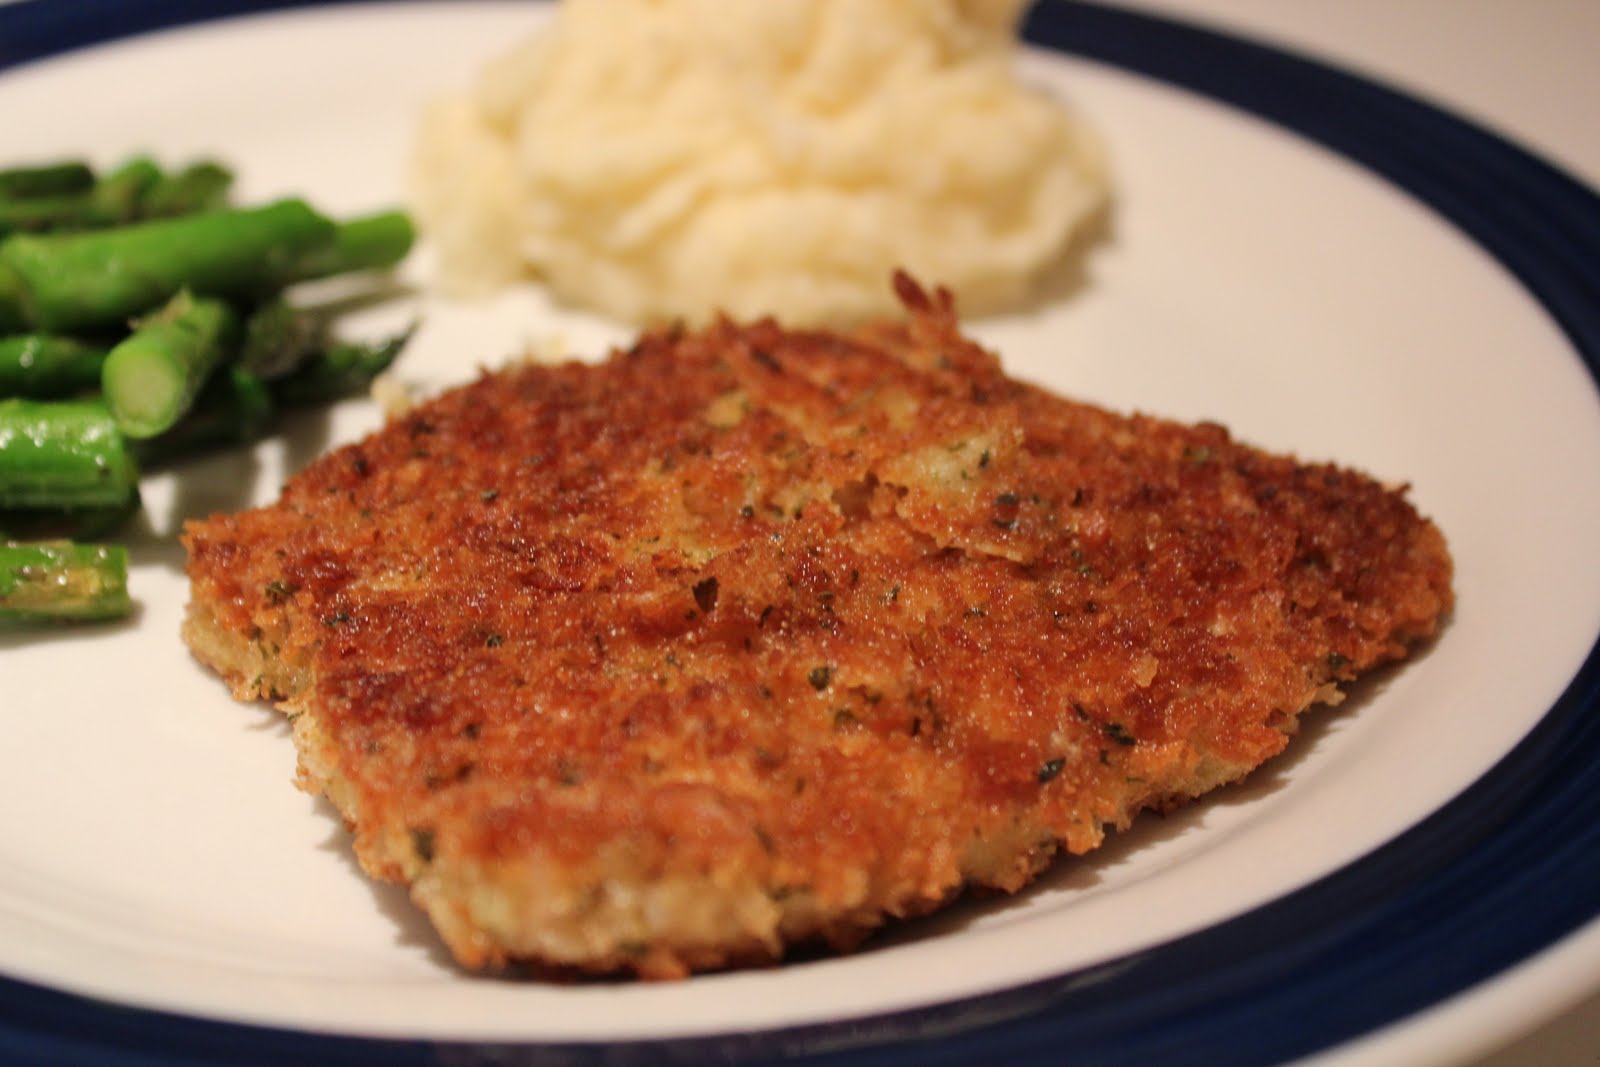 Near to Nothing: Breaded Pork Chops